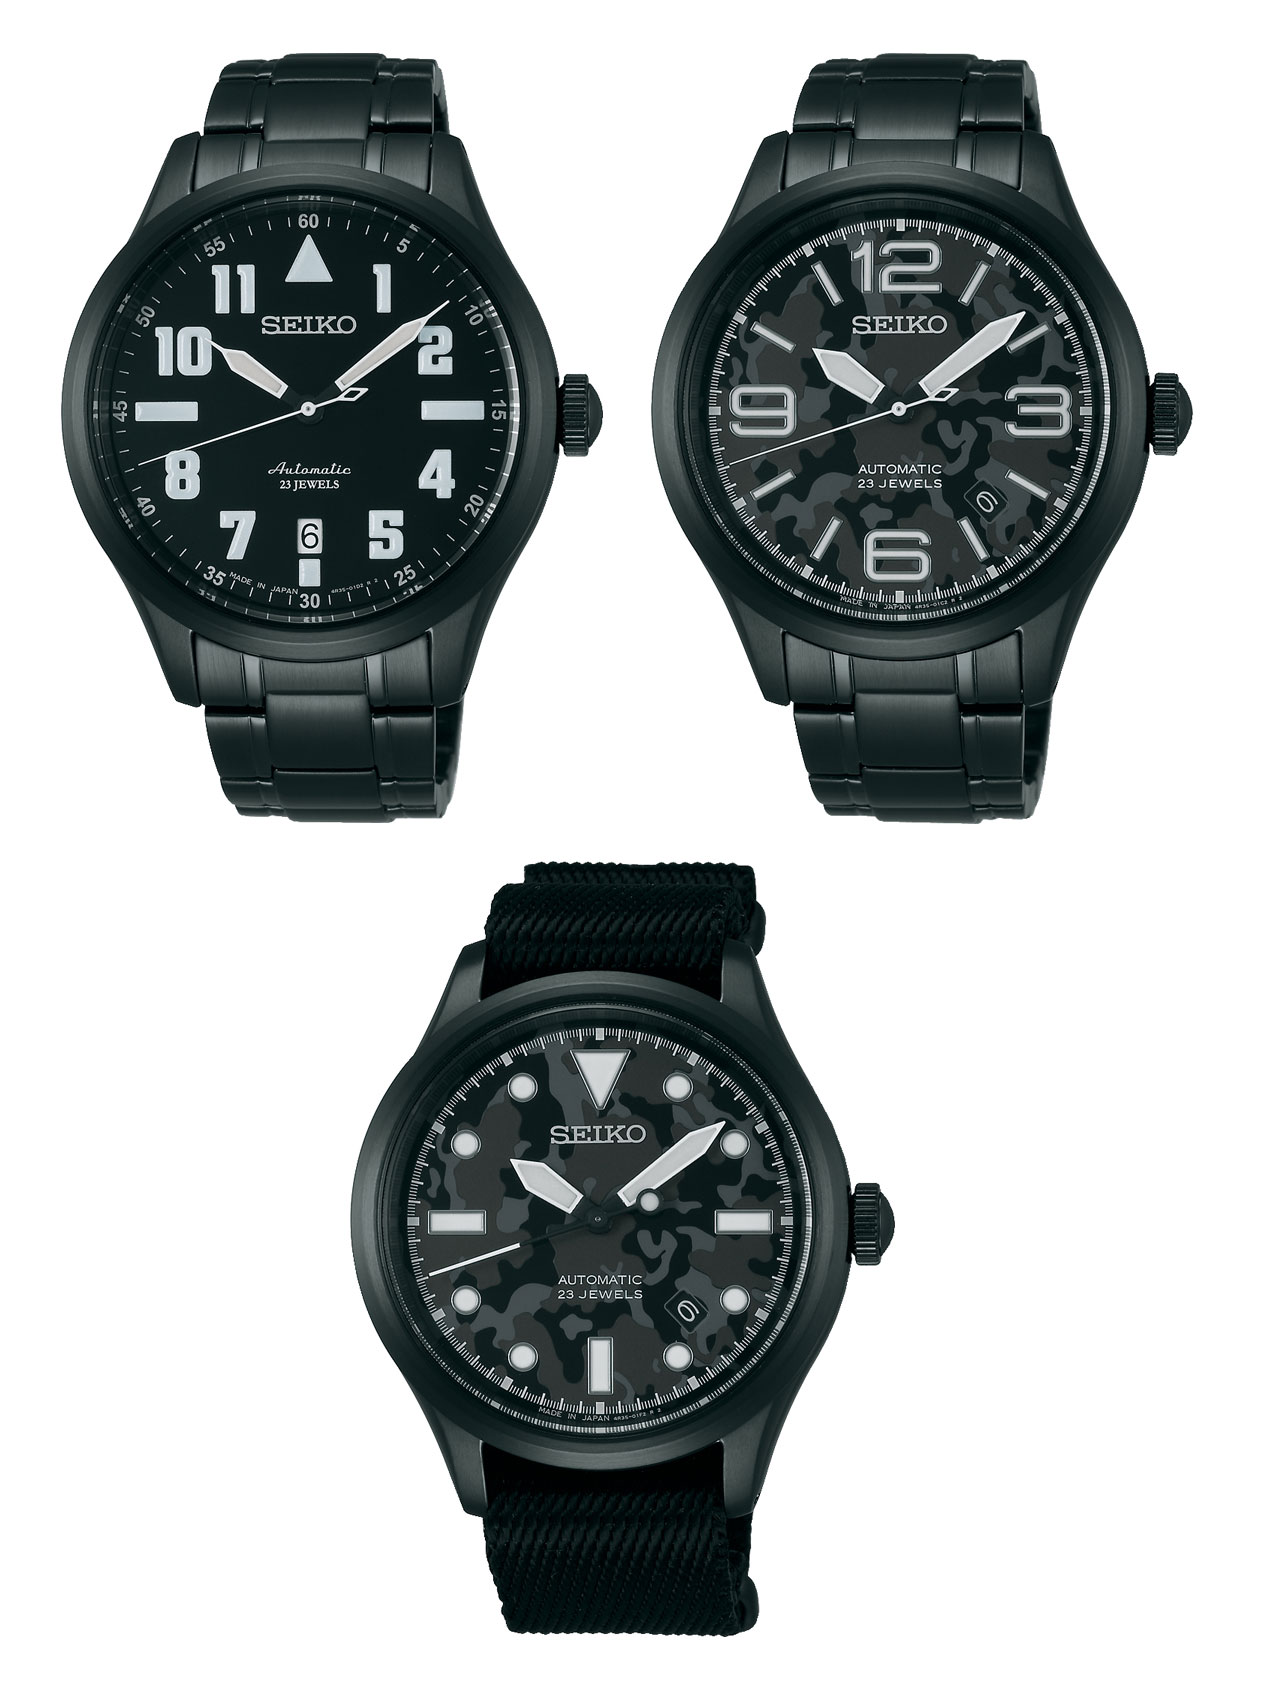 Introducing the Seiko x Nano Universe Funky, Military-Inspired Limited